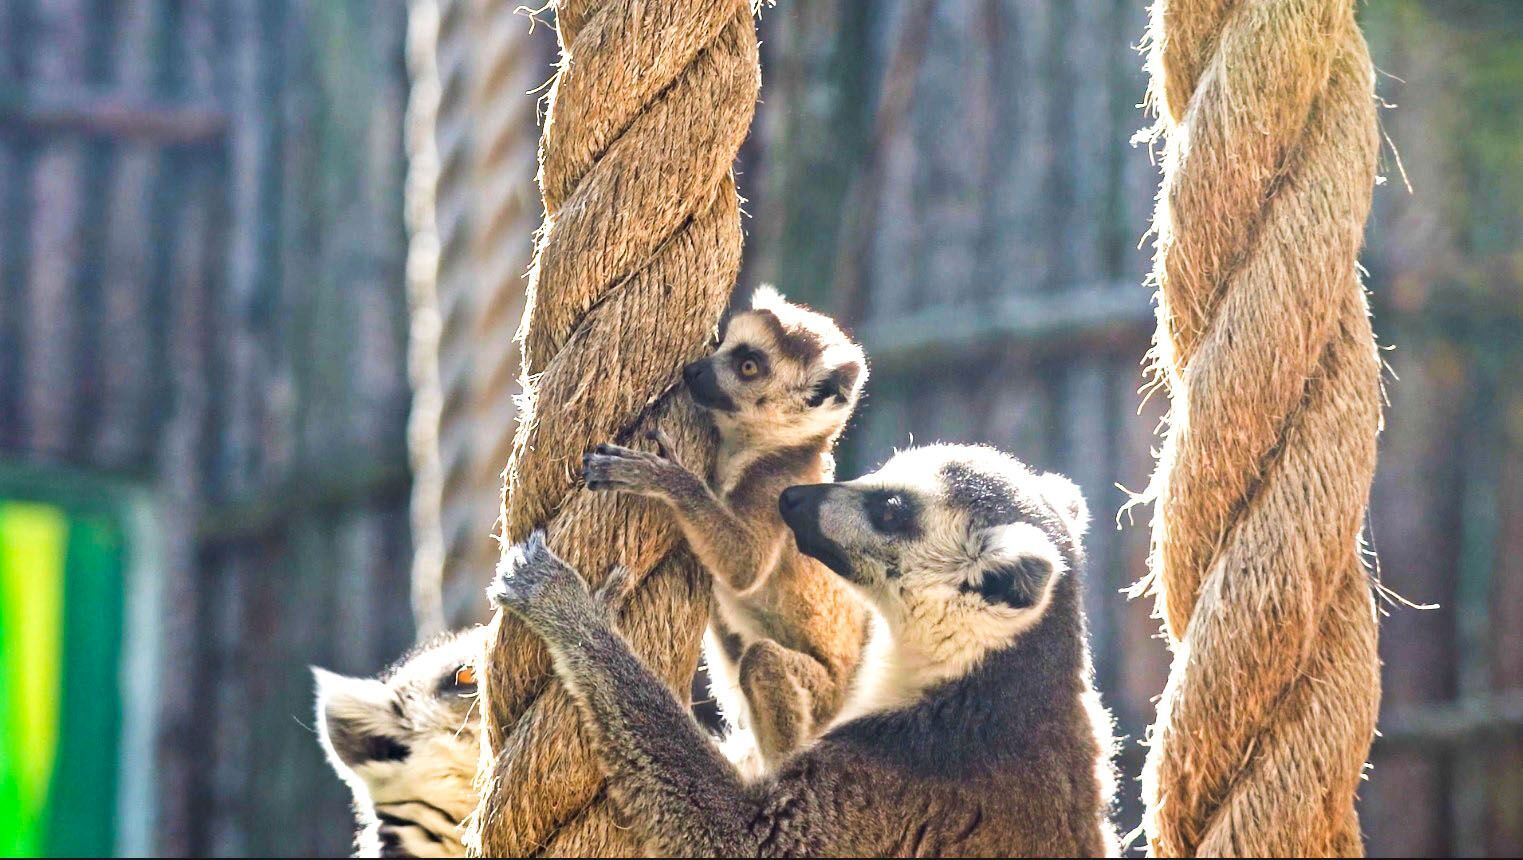 Two baby ring-tailed lemurs were born at the Moscow Zoo - Lemur, Red Book, Rare view, Moscow Zoo, Zoo, Animals, Longpost, Video, Vertical video